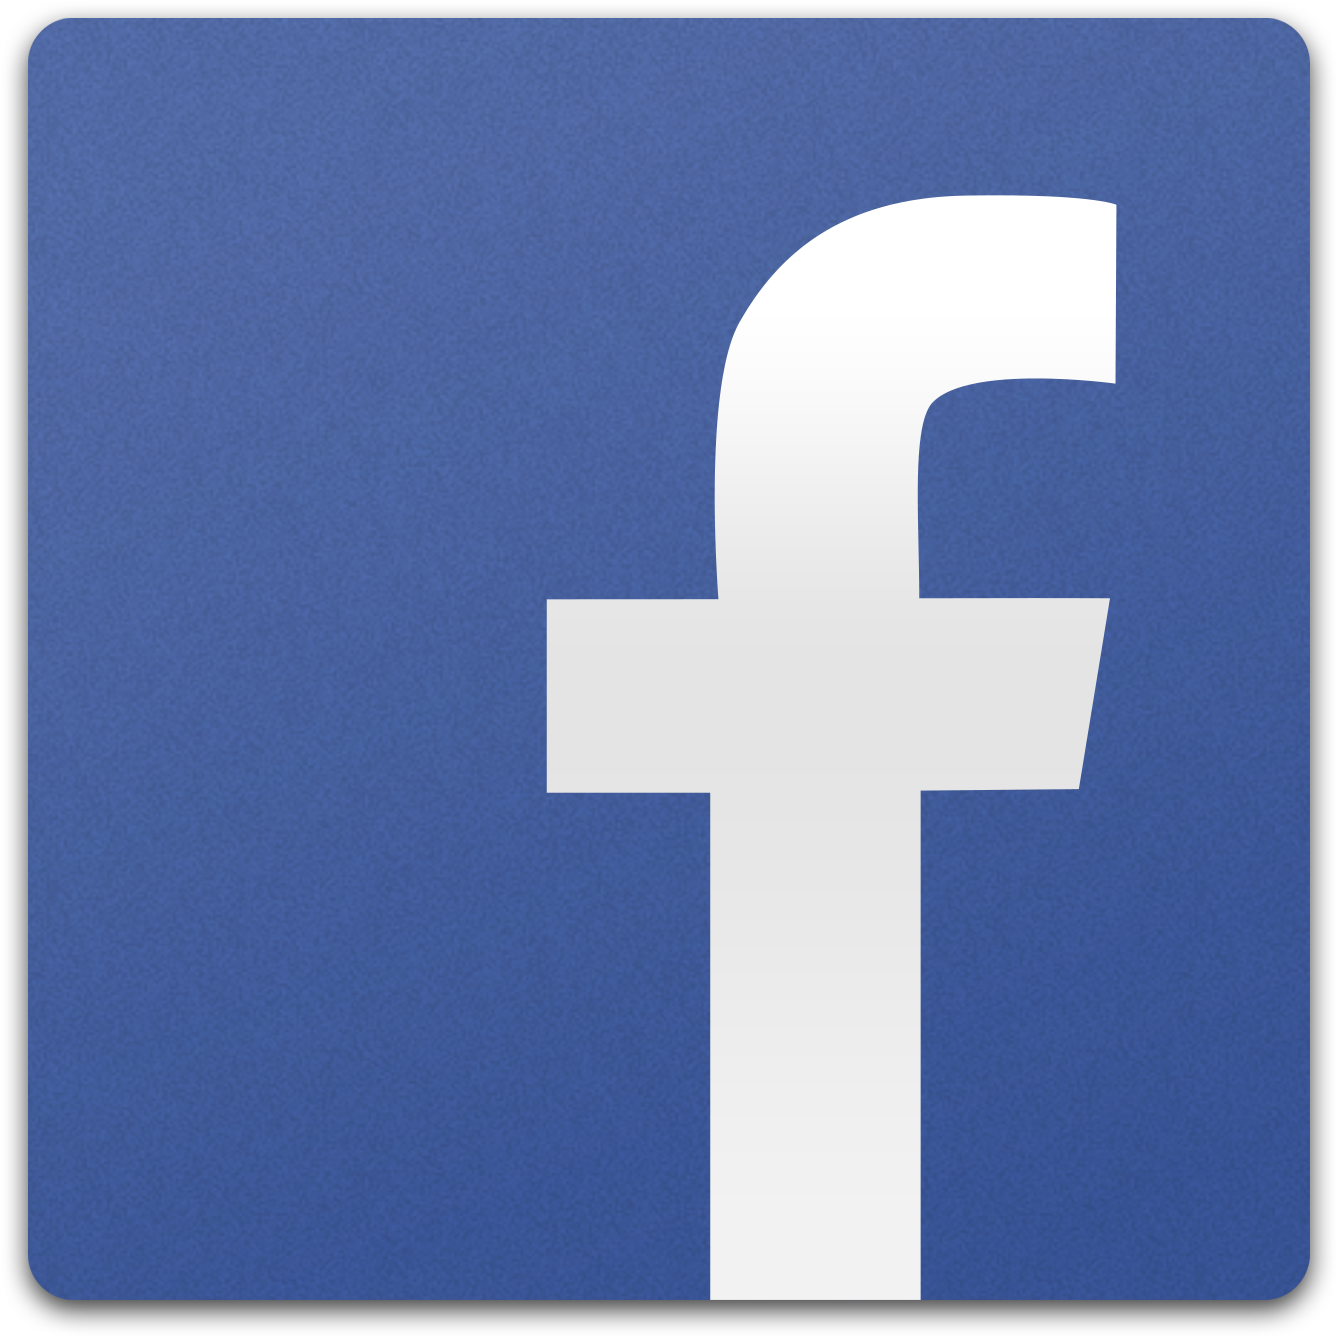 Official Facebook Icon Pictures To Pin On Pinterest - Facebook 69 Apk (1422x1422), Png Download